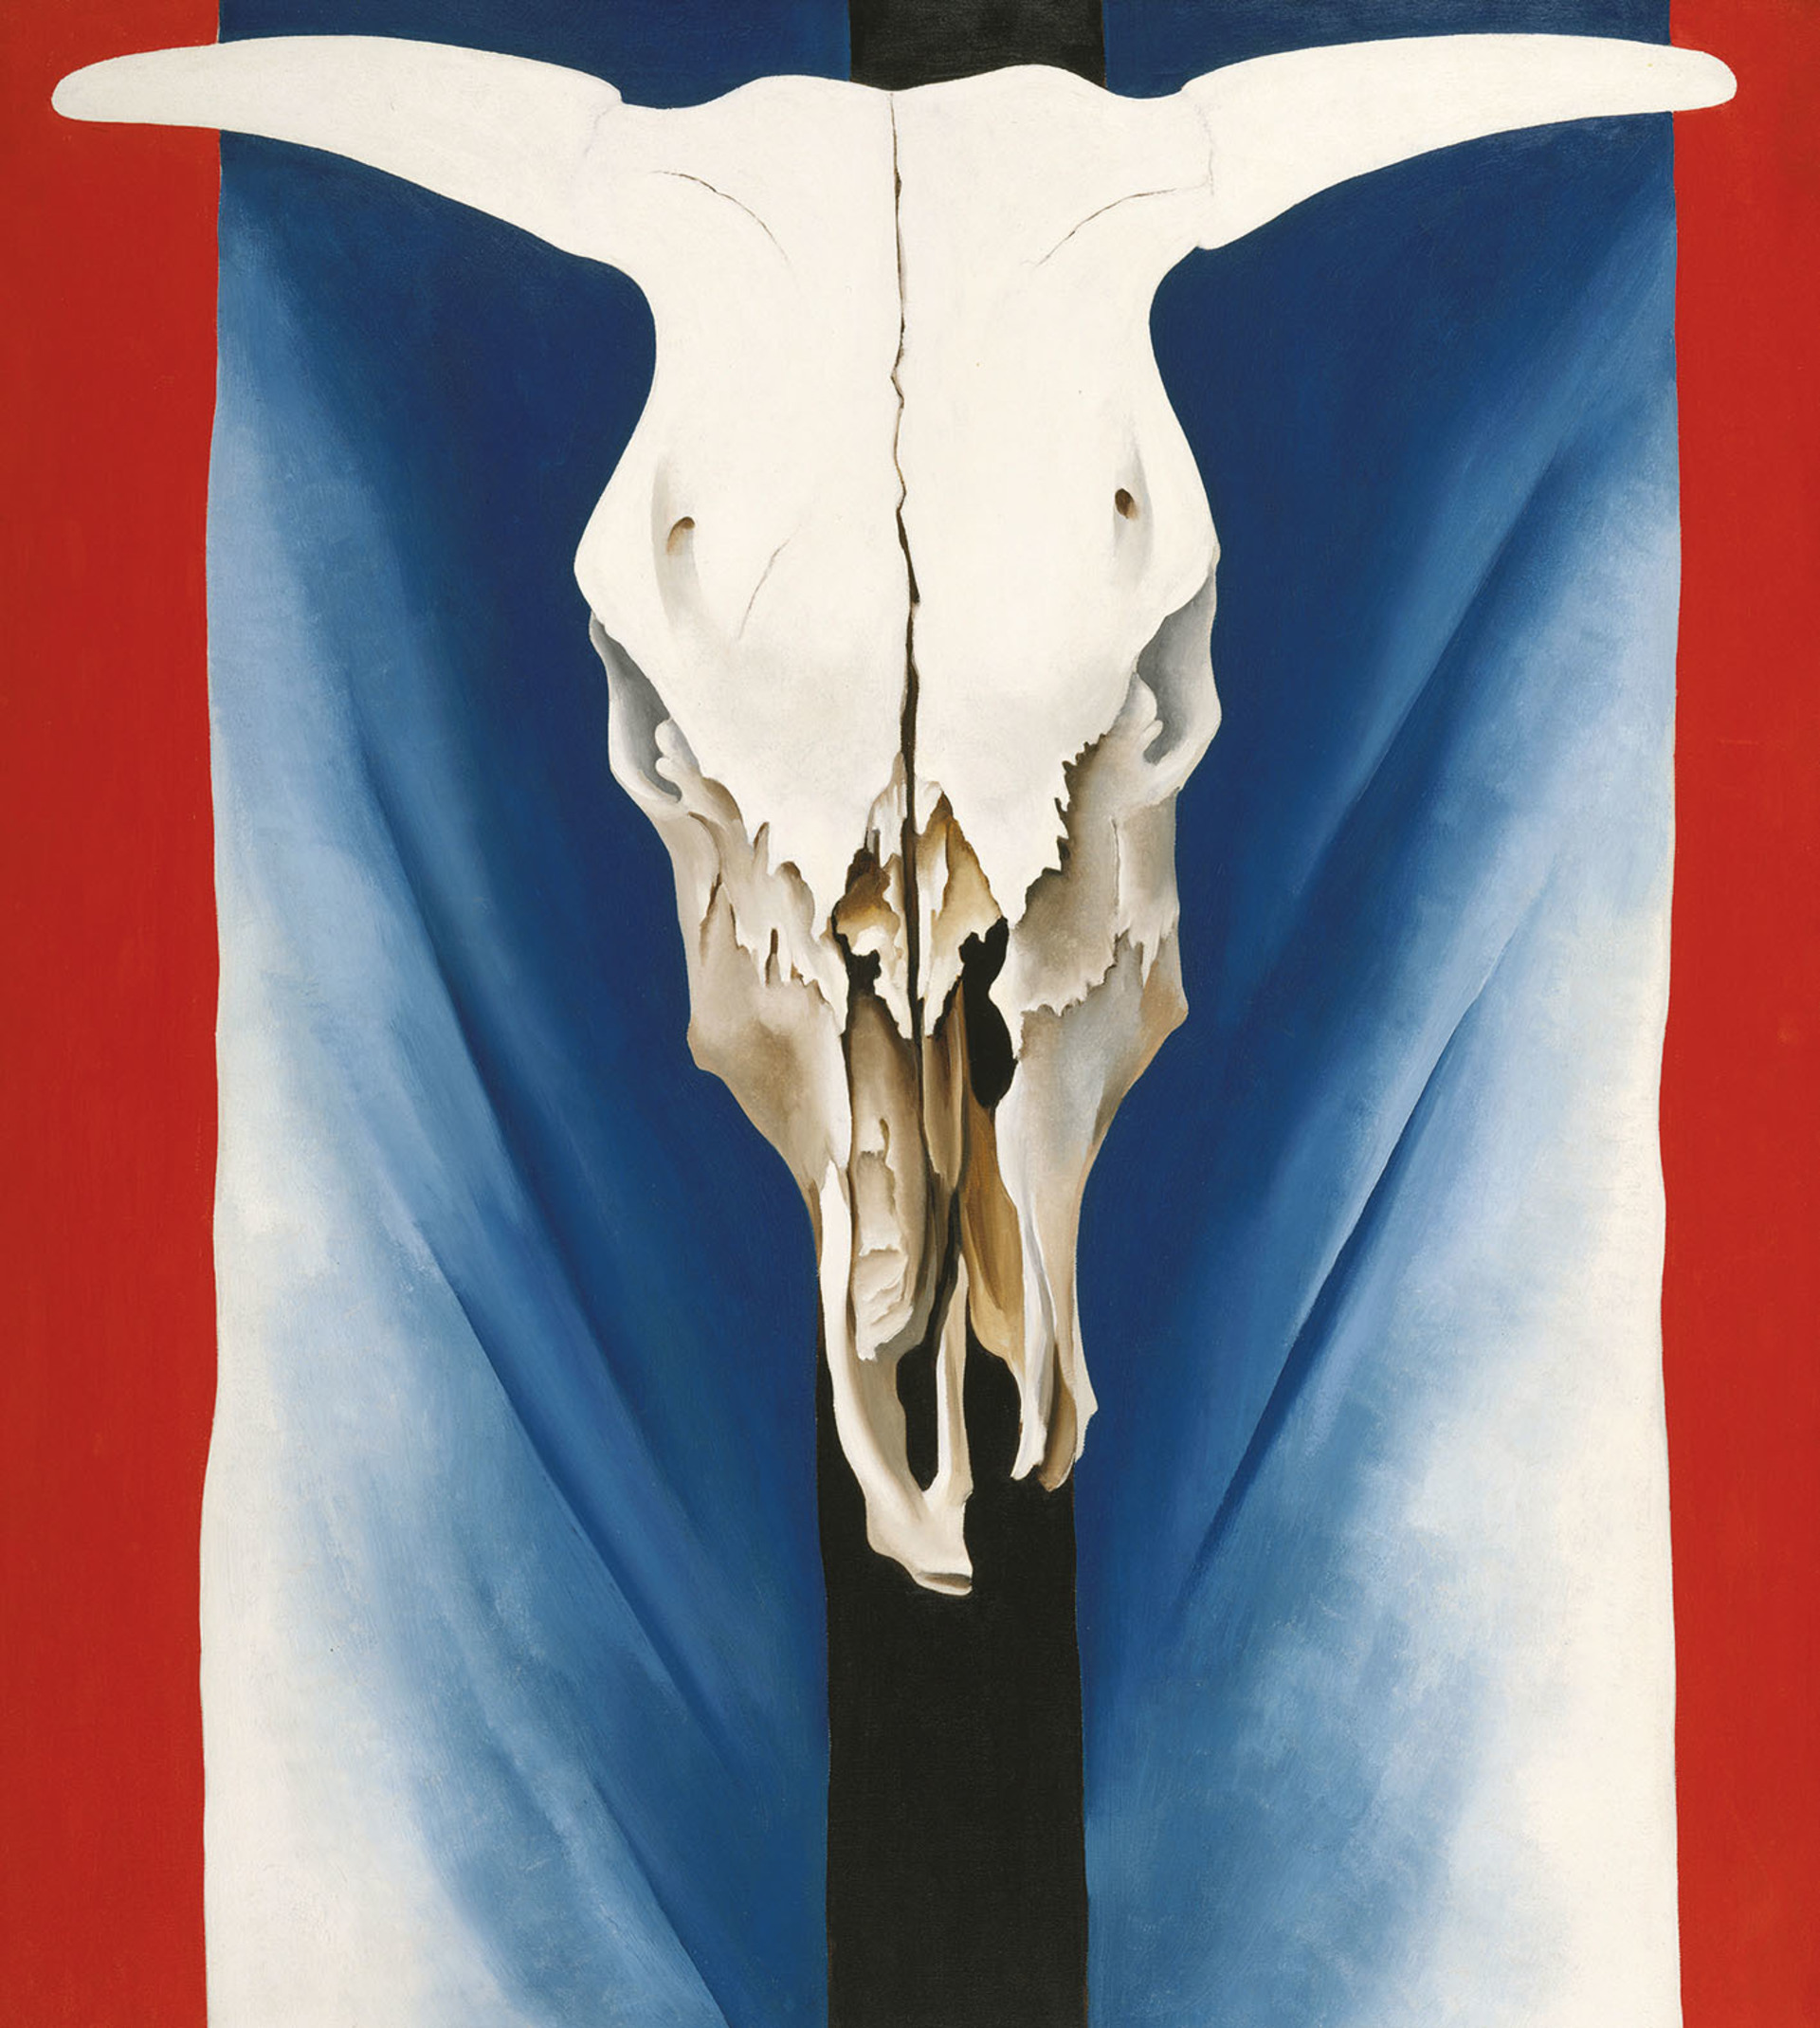 Georgia O'Keeffe_Cow's Skull Red, White, and Blue, 1931_The Met.jpg